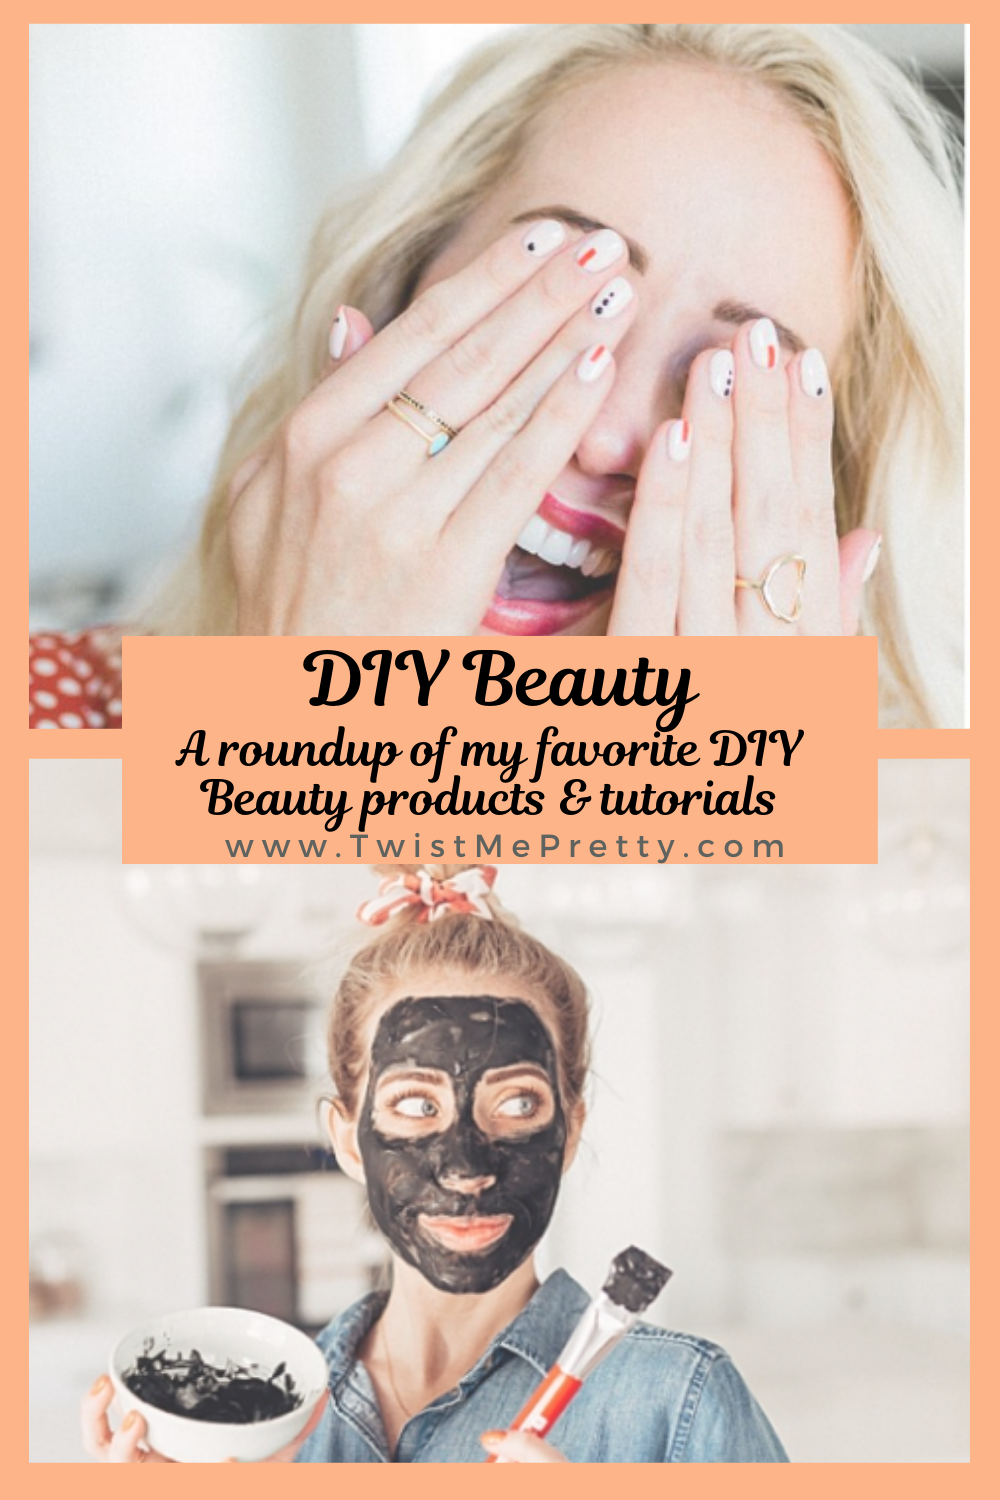 diy beauty. a roundup of my favorite diy beauty products and tutorials. www.twistmepretty.com